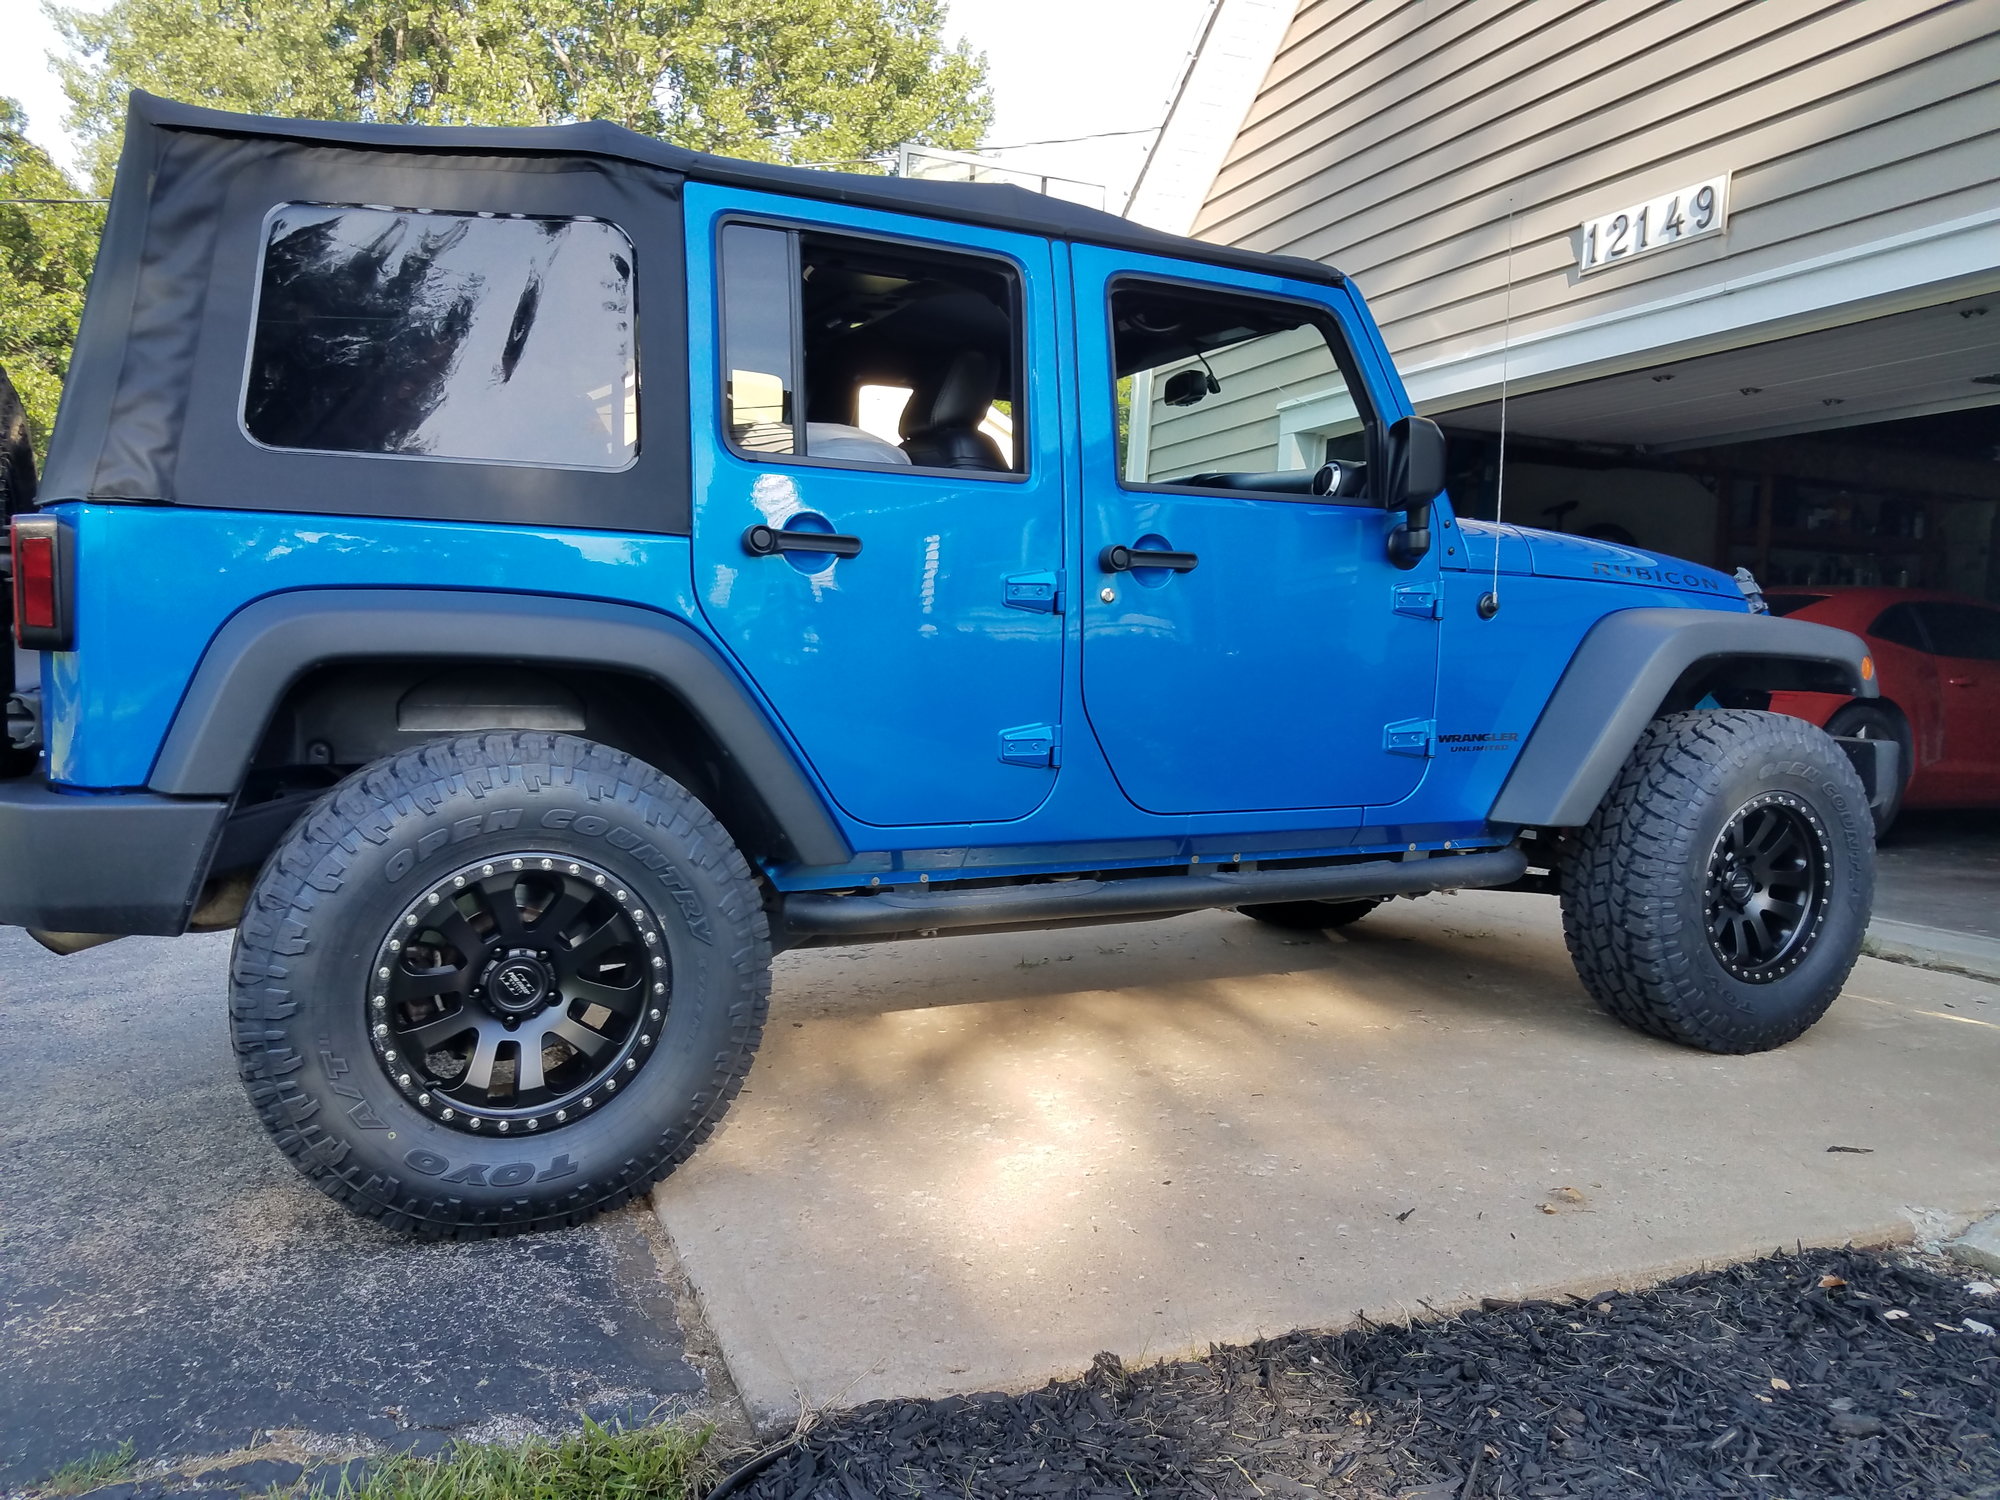 305/70R17's vs 315/70R17's  - The top destination for Jeep JK  and JL Wrangler news, rumors, and discussion